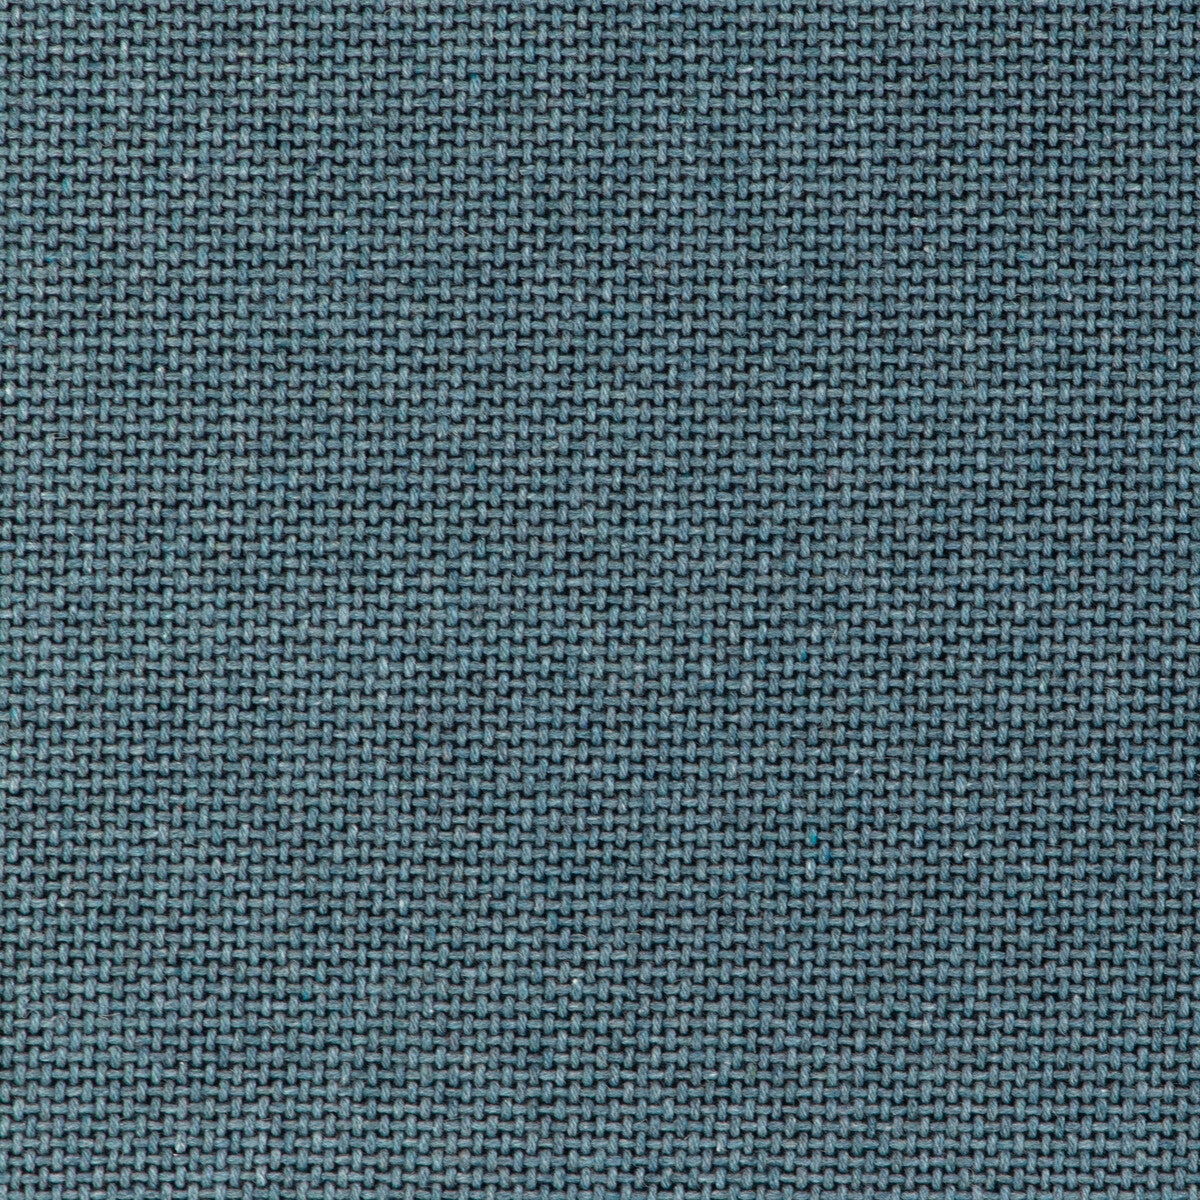 Easton Wool fabric in lake color - pattern 37027.511.0 - by Kravet Contract